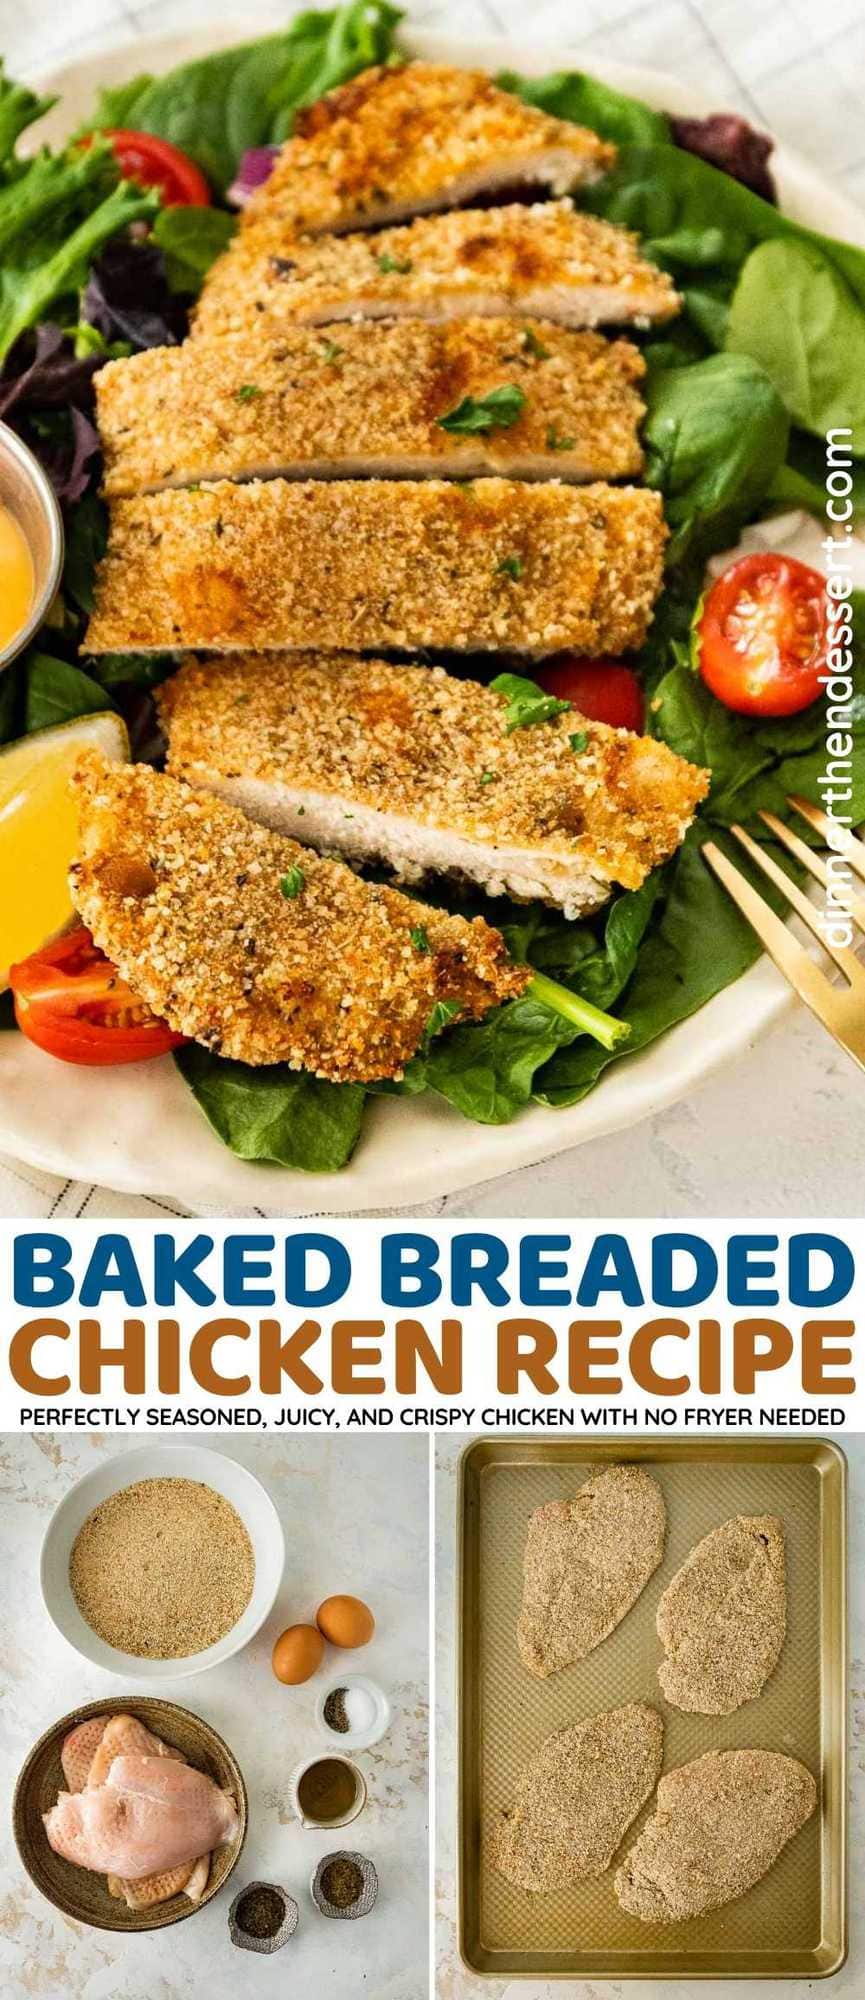 Baked Breaded Chicken collage